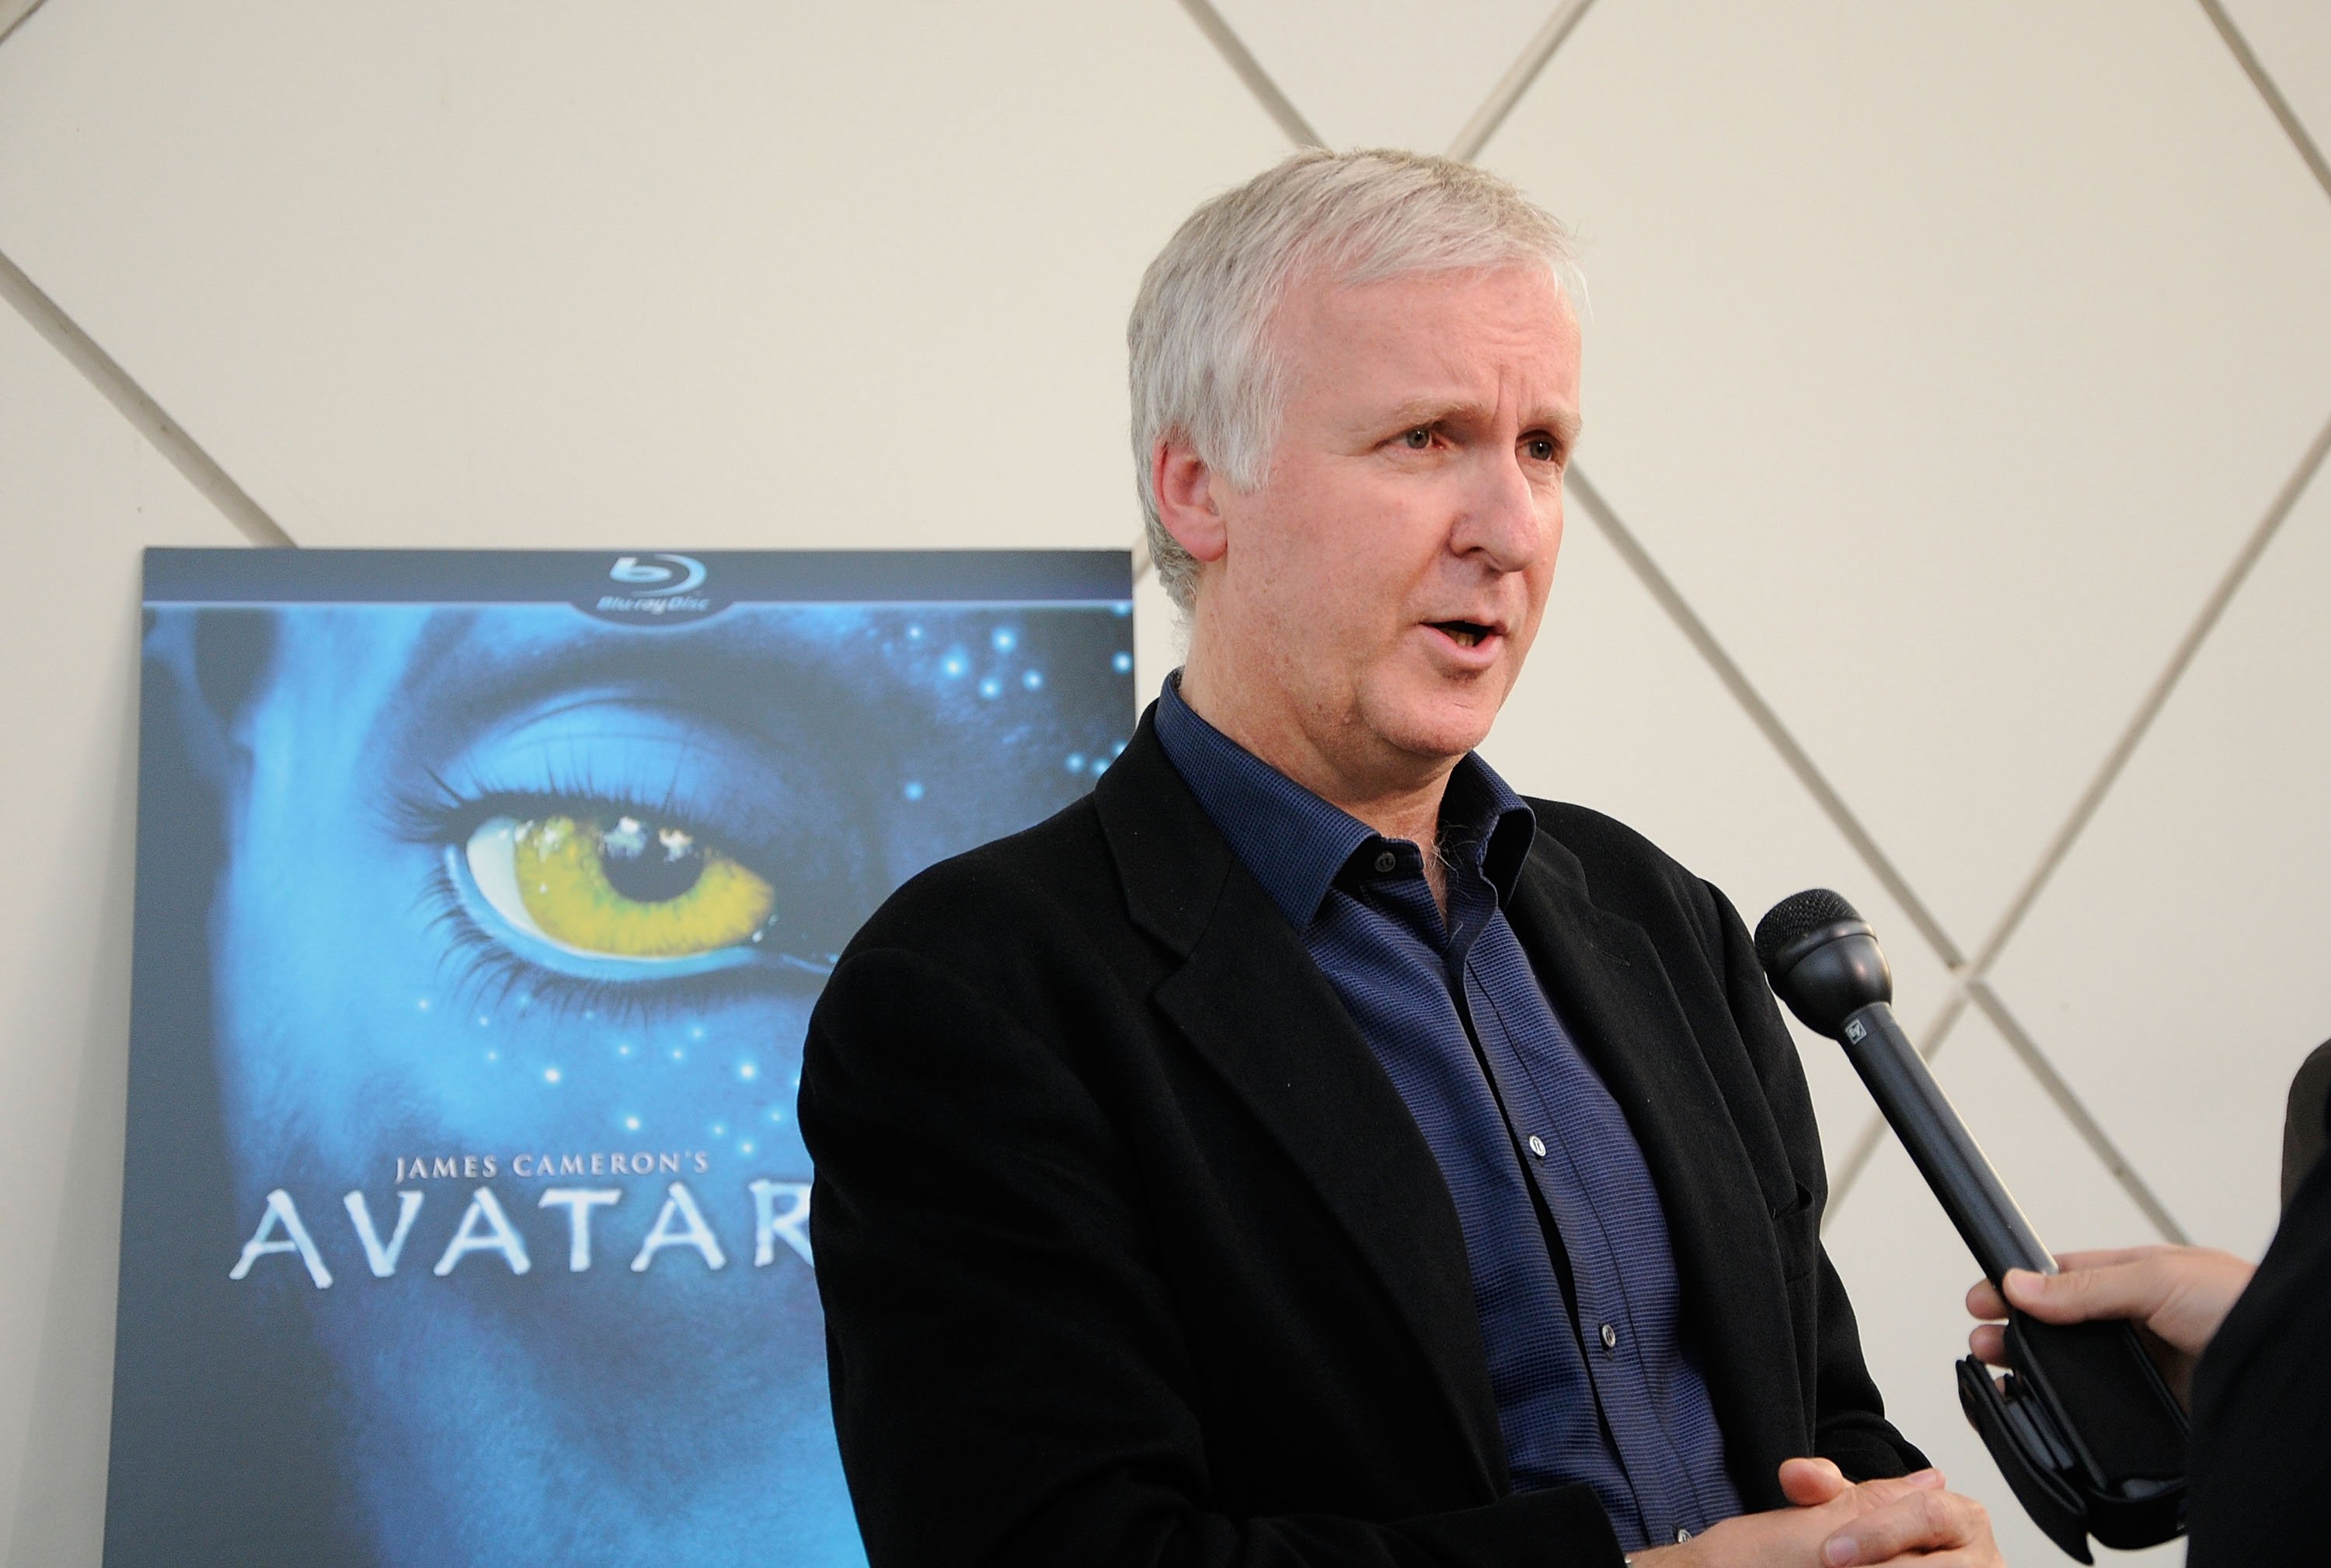 James Cameron attends the 20th Century Fox and The California Institute of Technology Avatar presentation